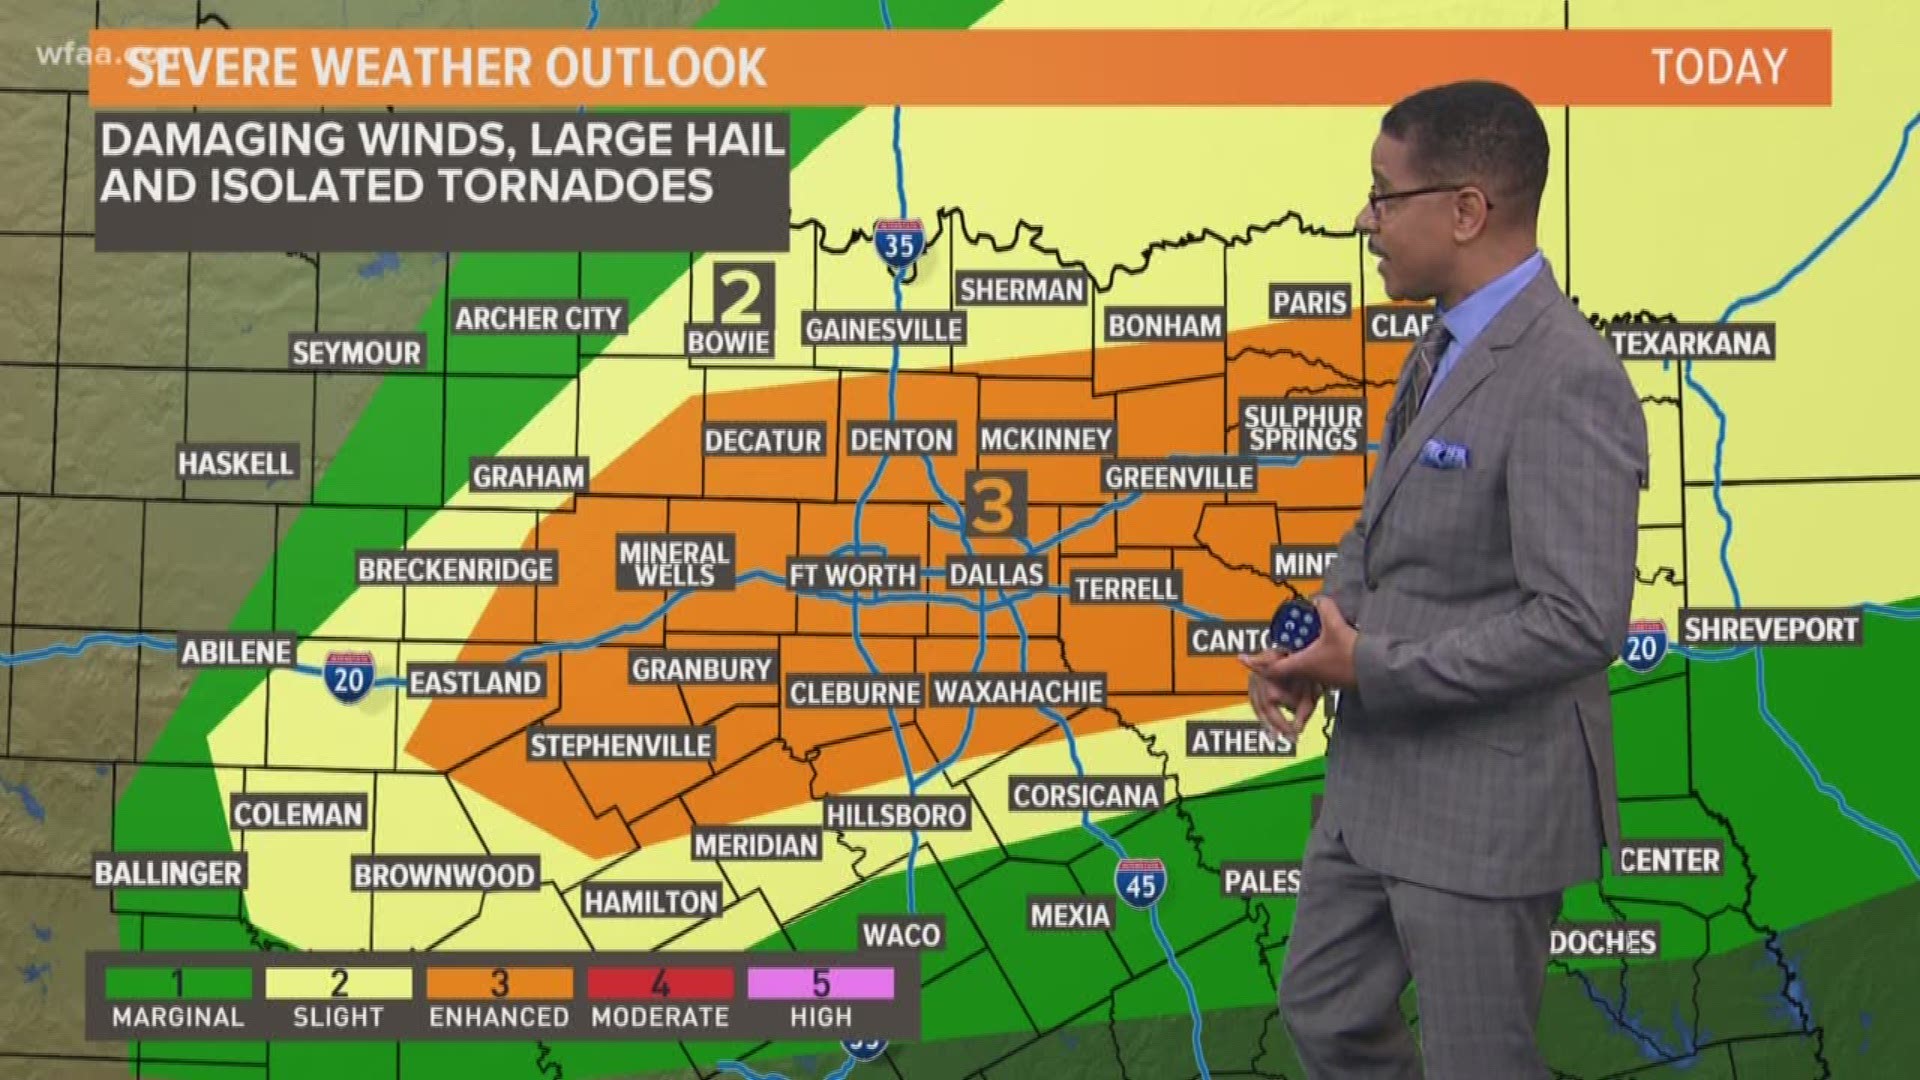 DFW Weather: Strong to severe storms possible through Wednesday evening for June 19, 2019